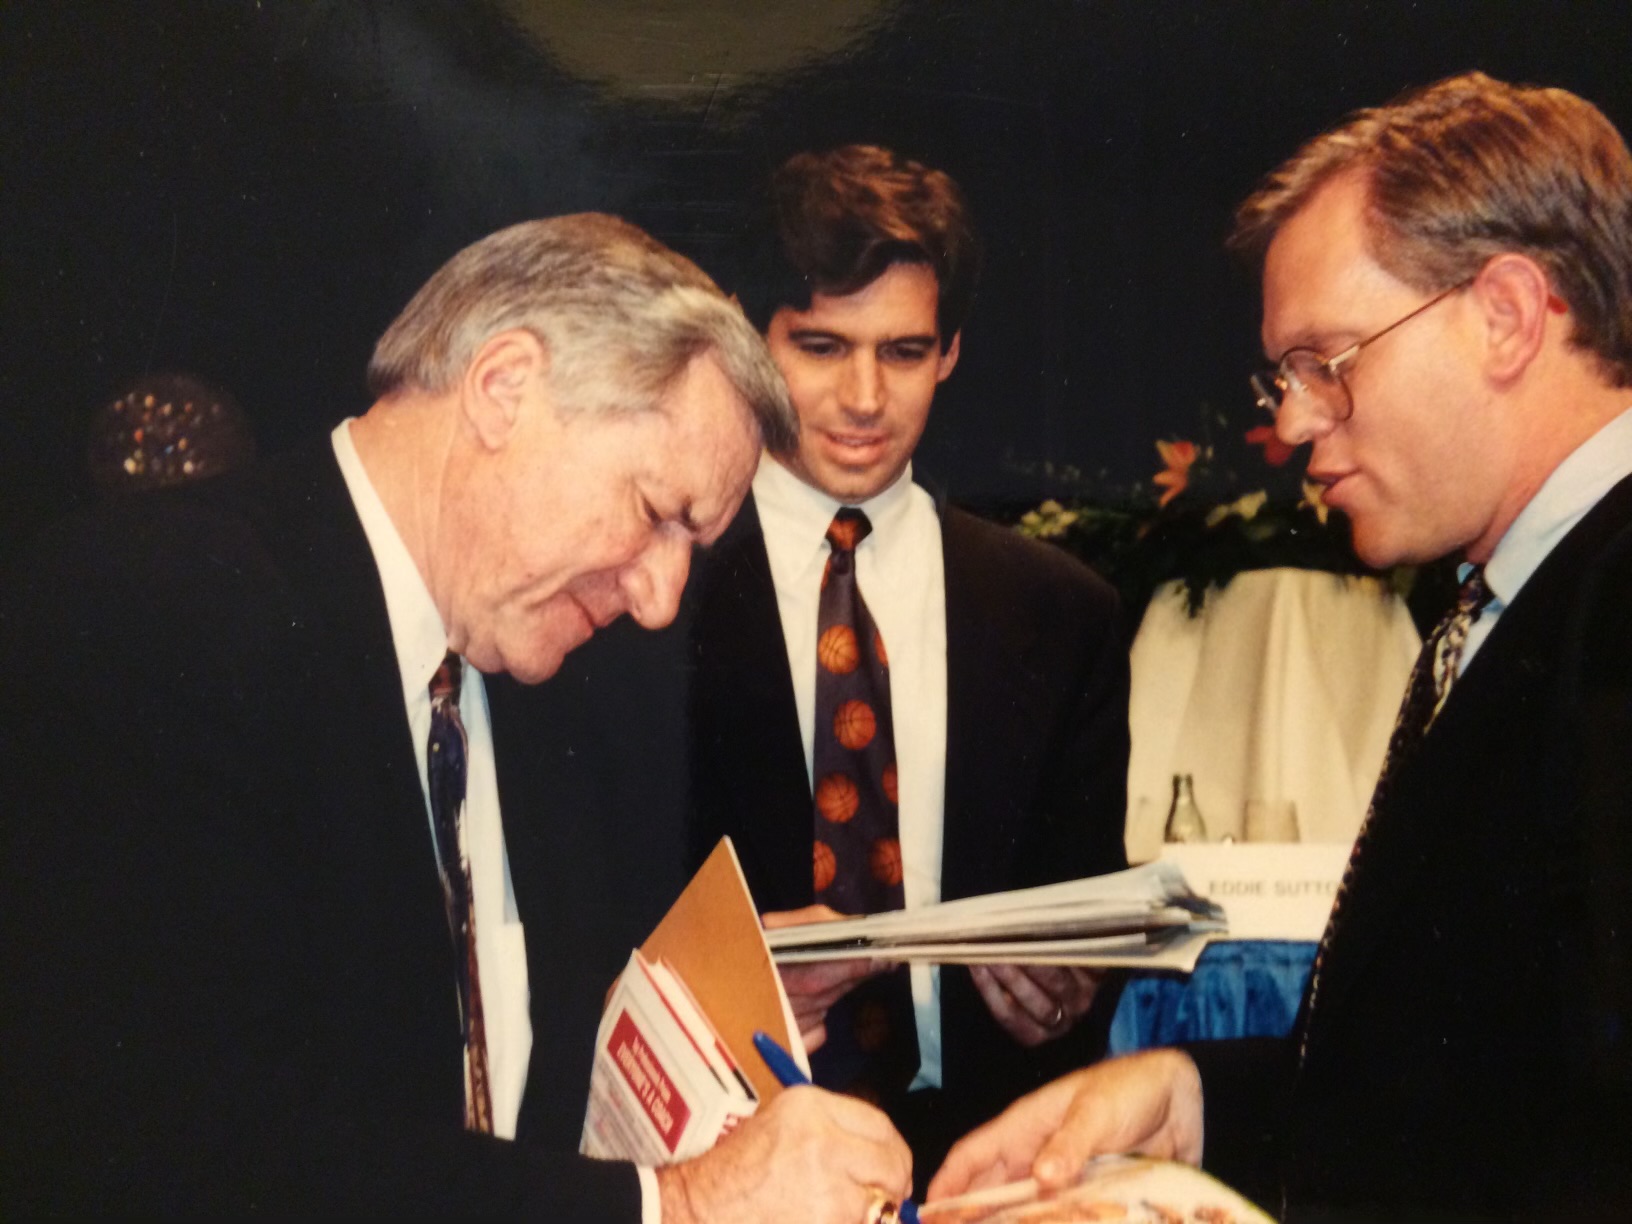 Tim getting an autograph from UNC coaching legend Dean Smith in 1995